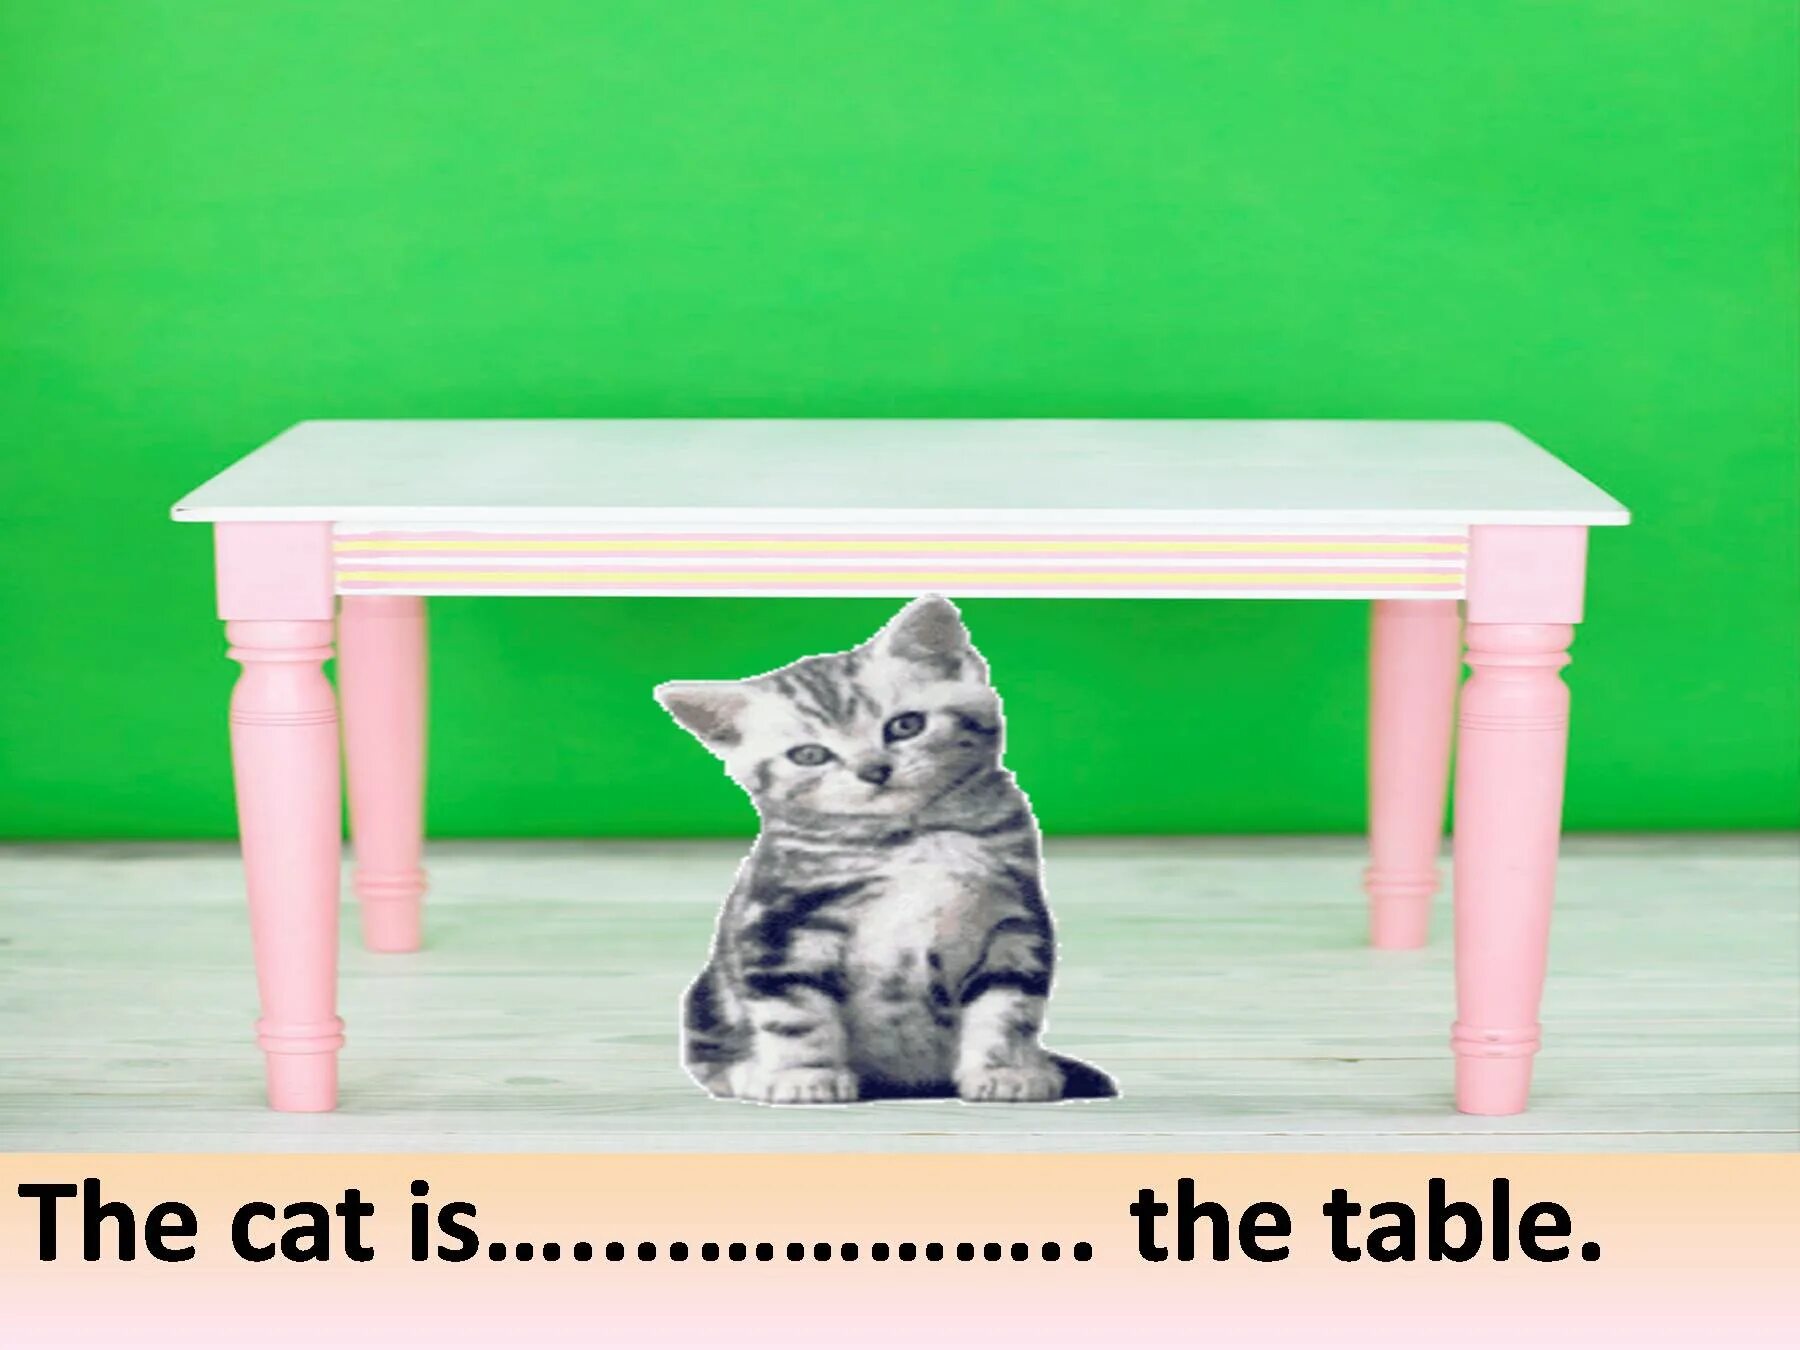 The cat is the chair. The Cat is under the Table. Behind the Table. Cat on the Table. Cat under.